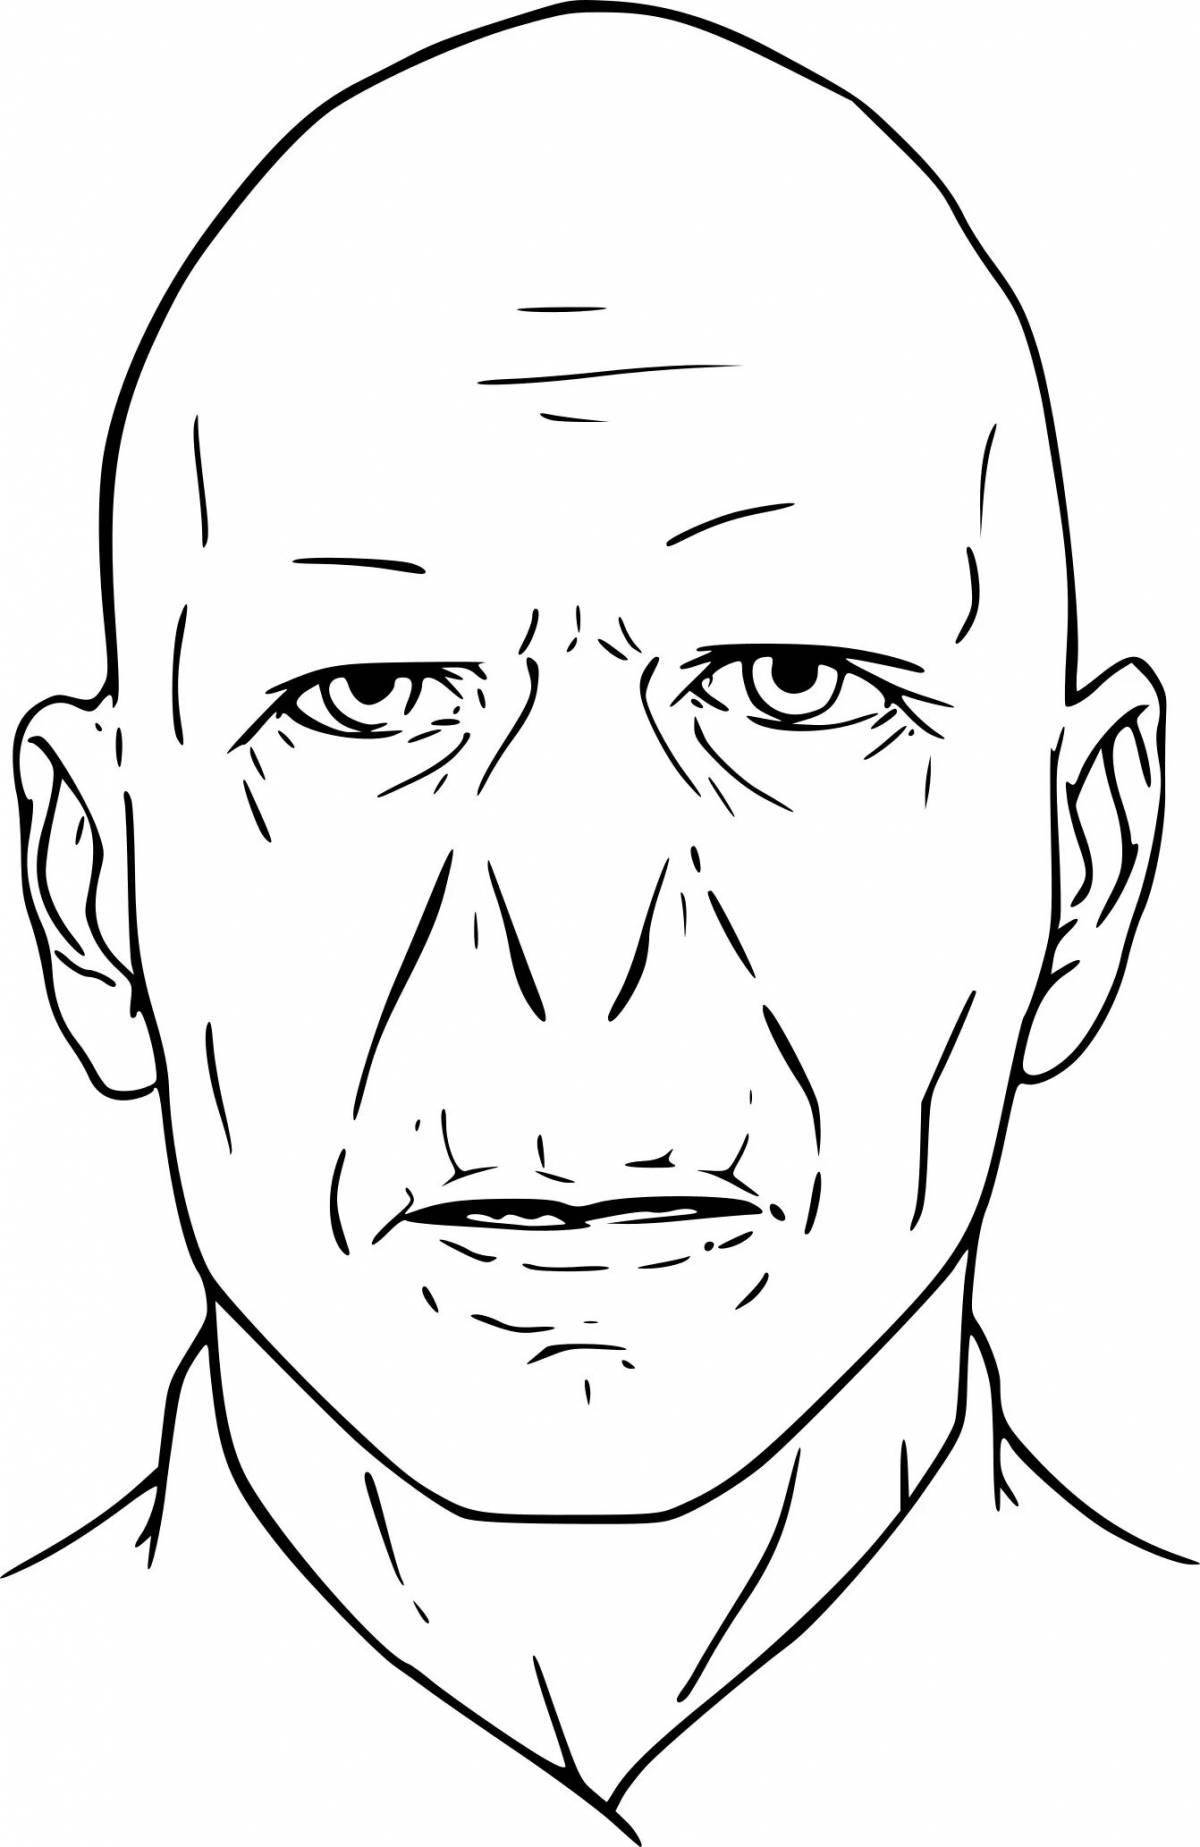 Royal voldemort coloring page